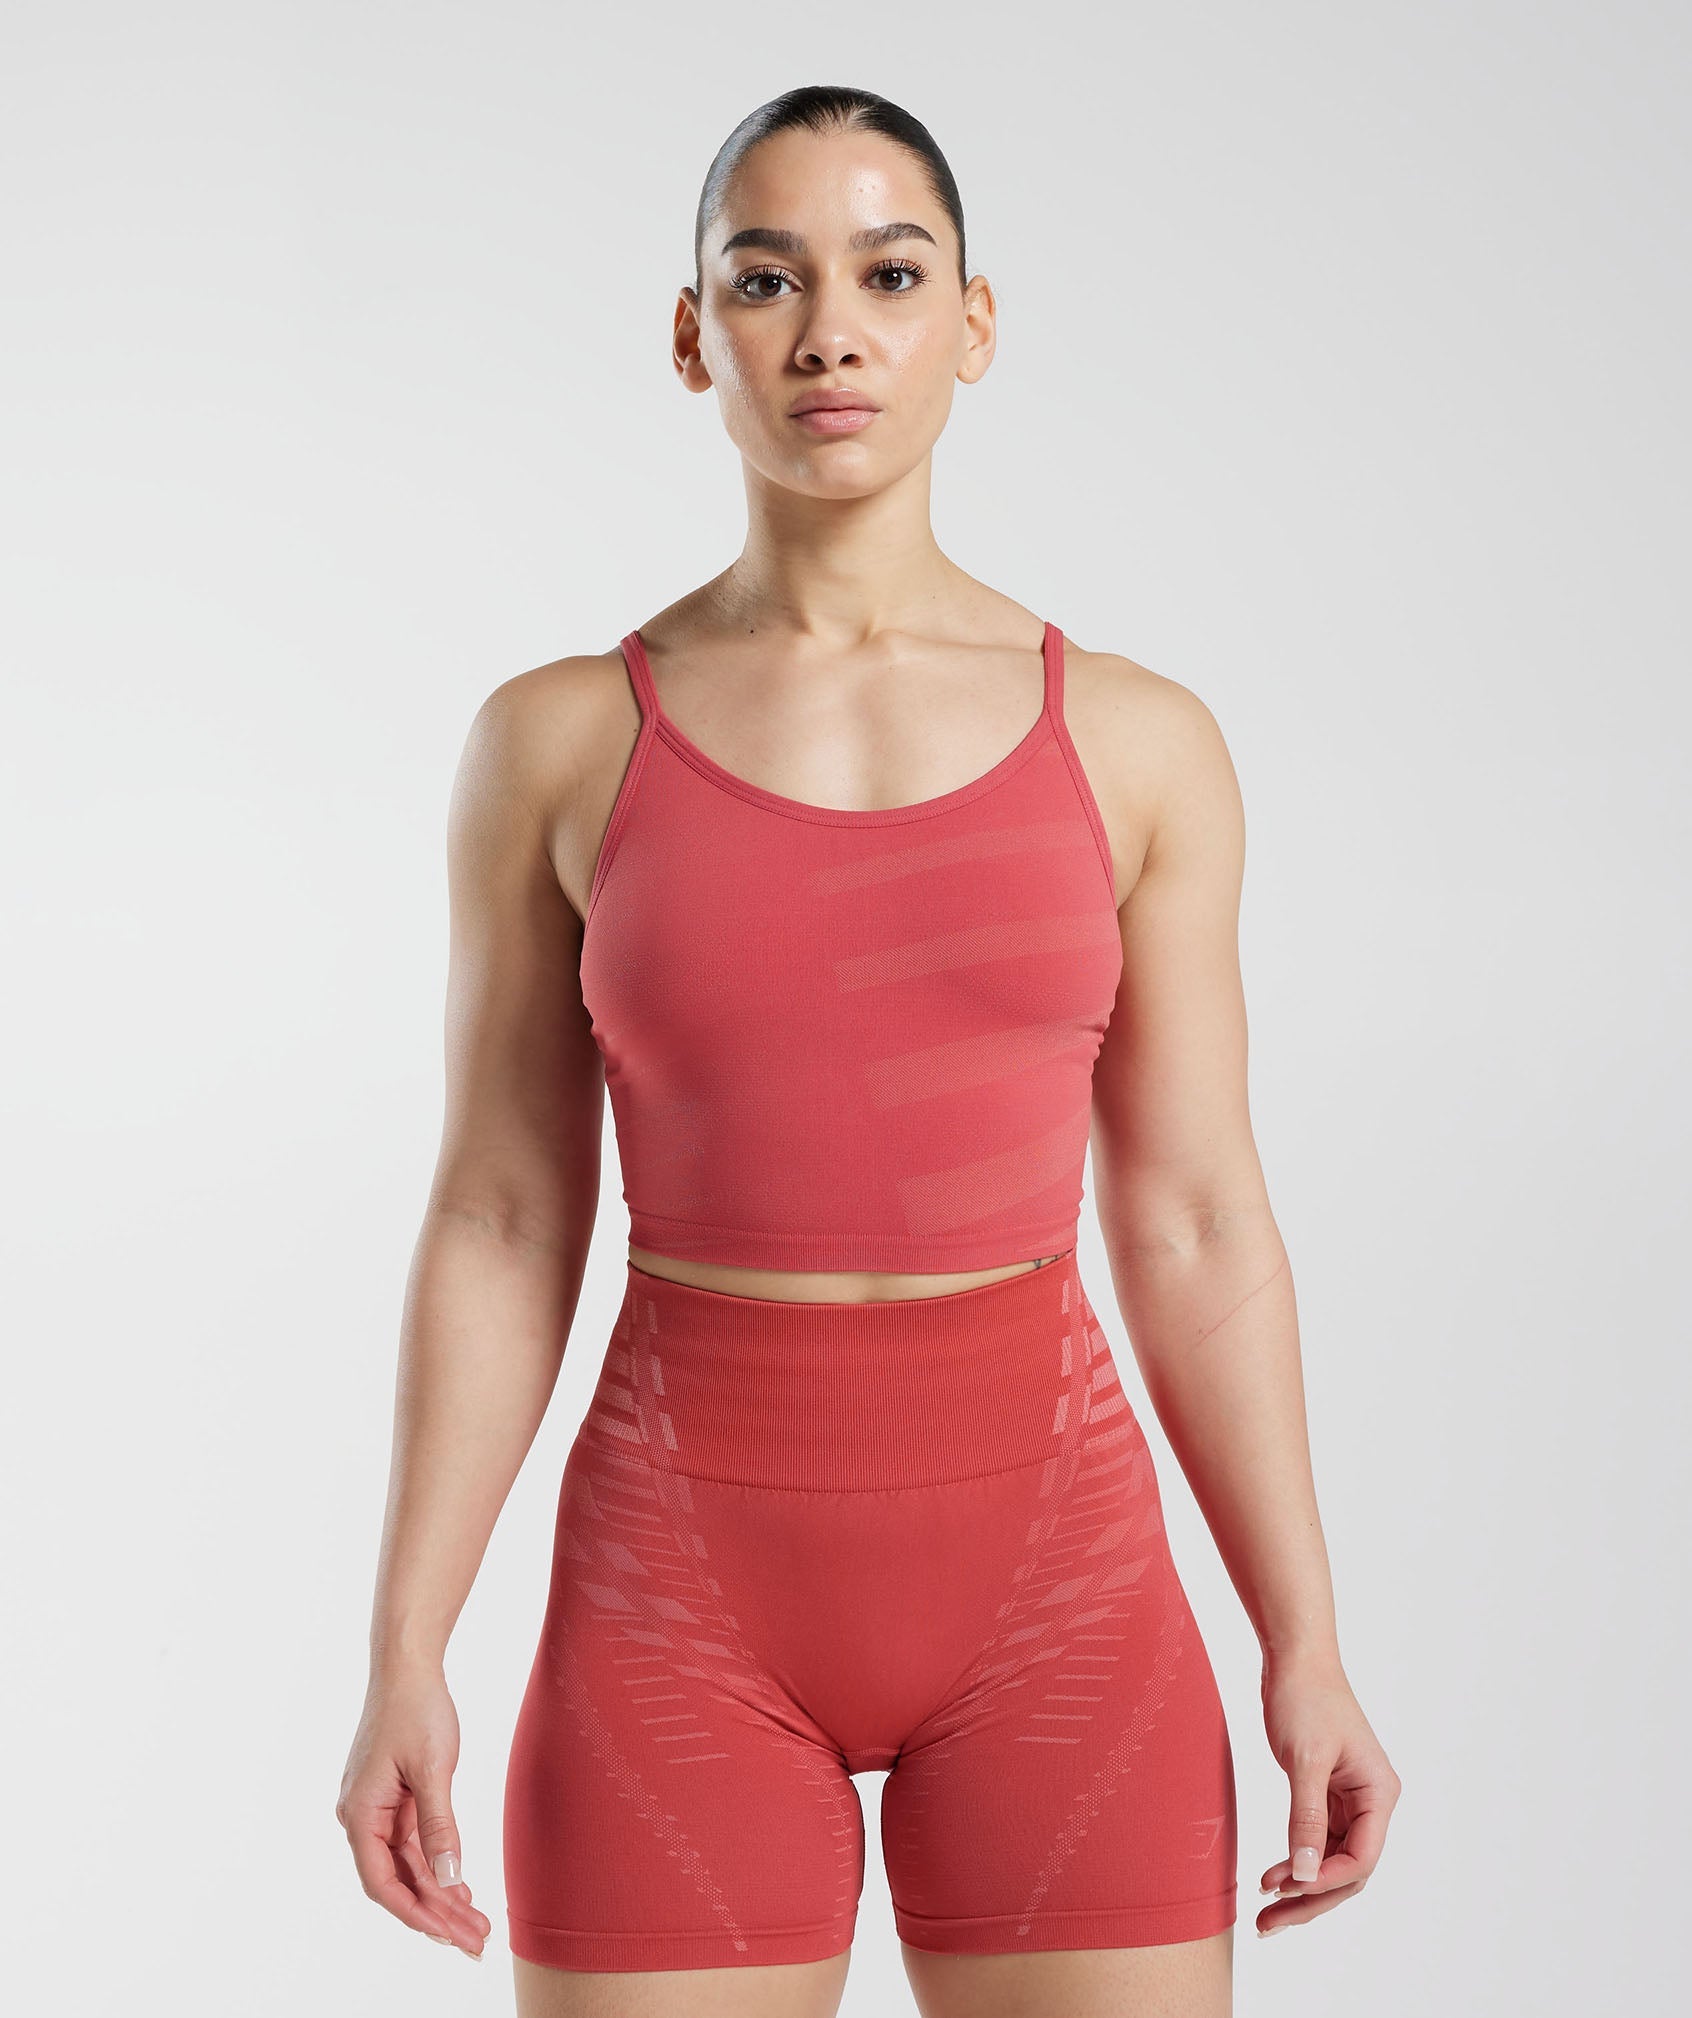 Apex Limit Cami Tank in Light Sundried Red/Terracotta Pink